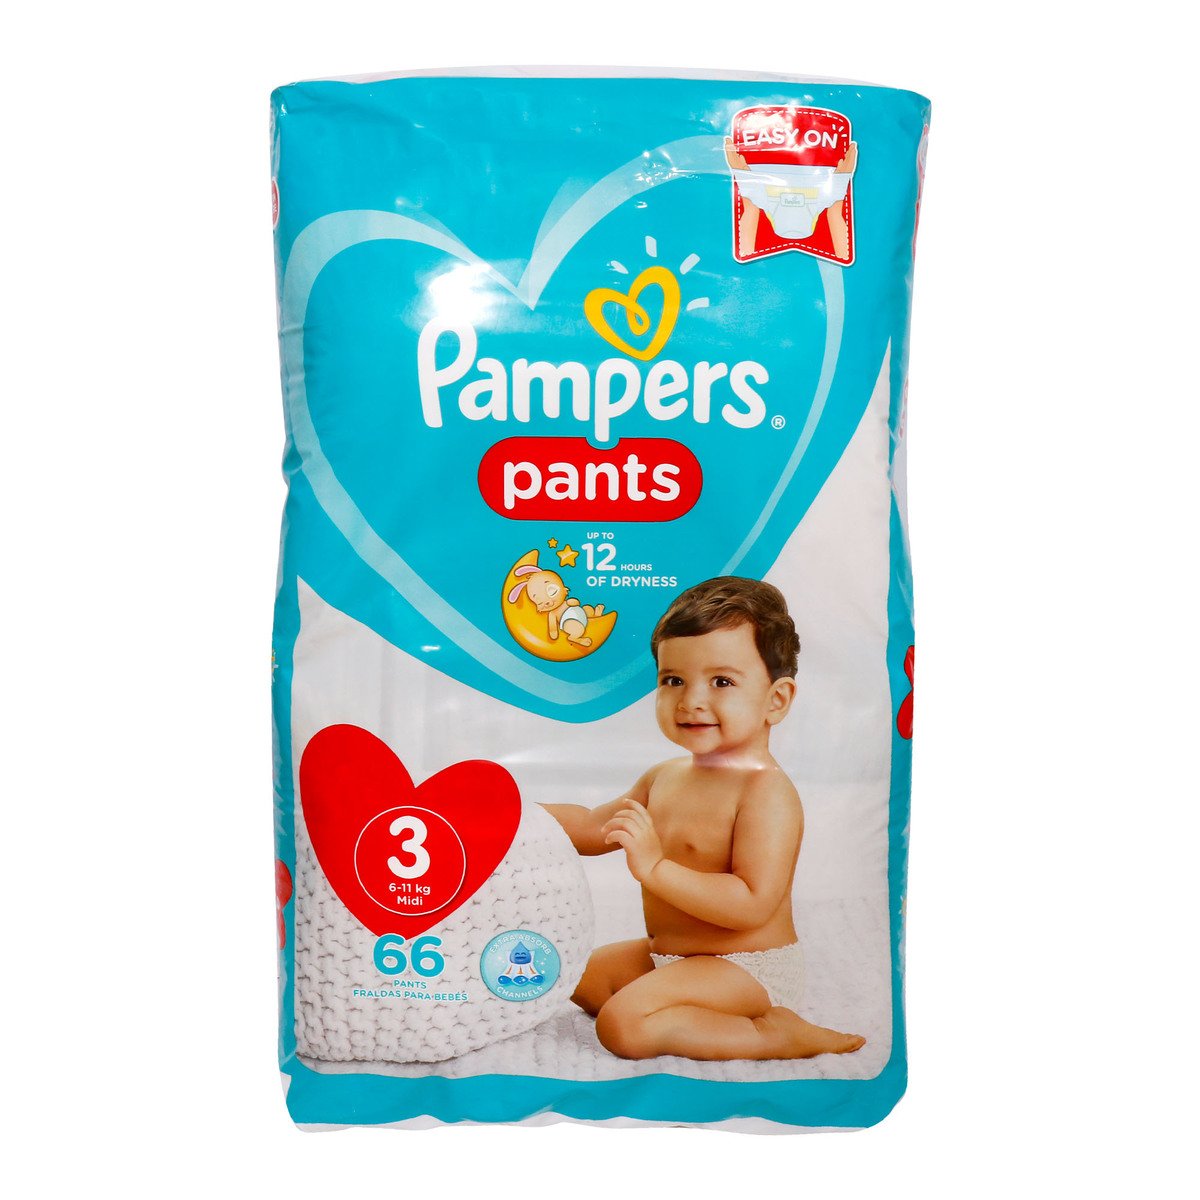 Pampers Baby Diaper Pants Size 3 6-11kg 66 Count